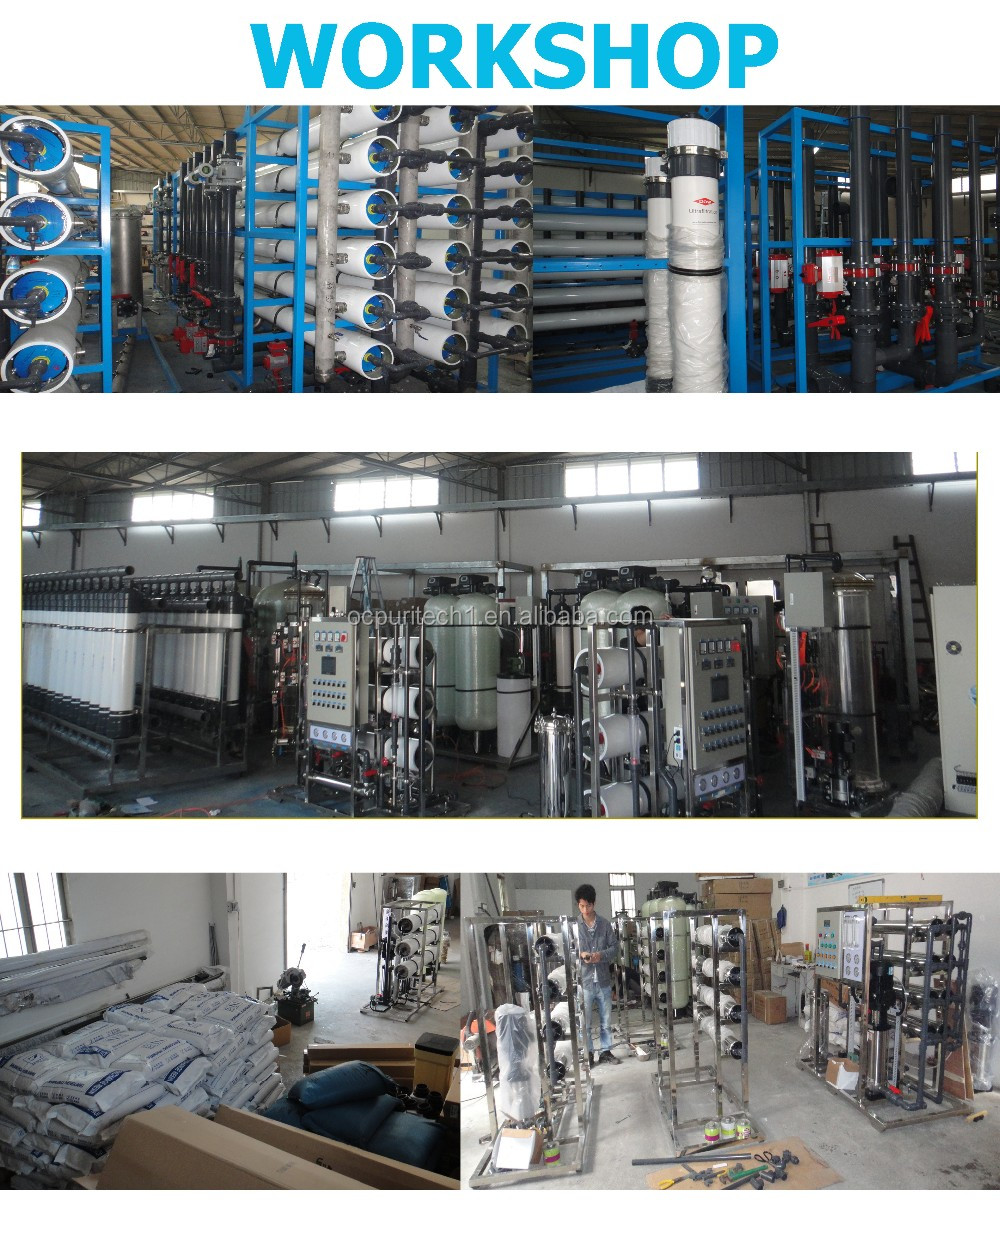 Hot sale comercial PP+UDF+CTO RO system small ro water treatment system